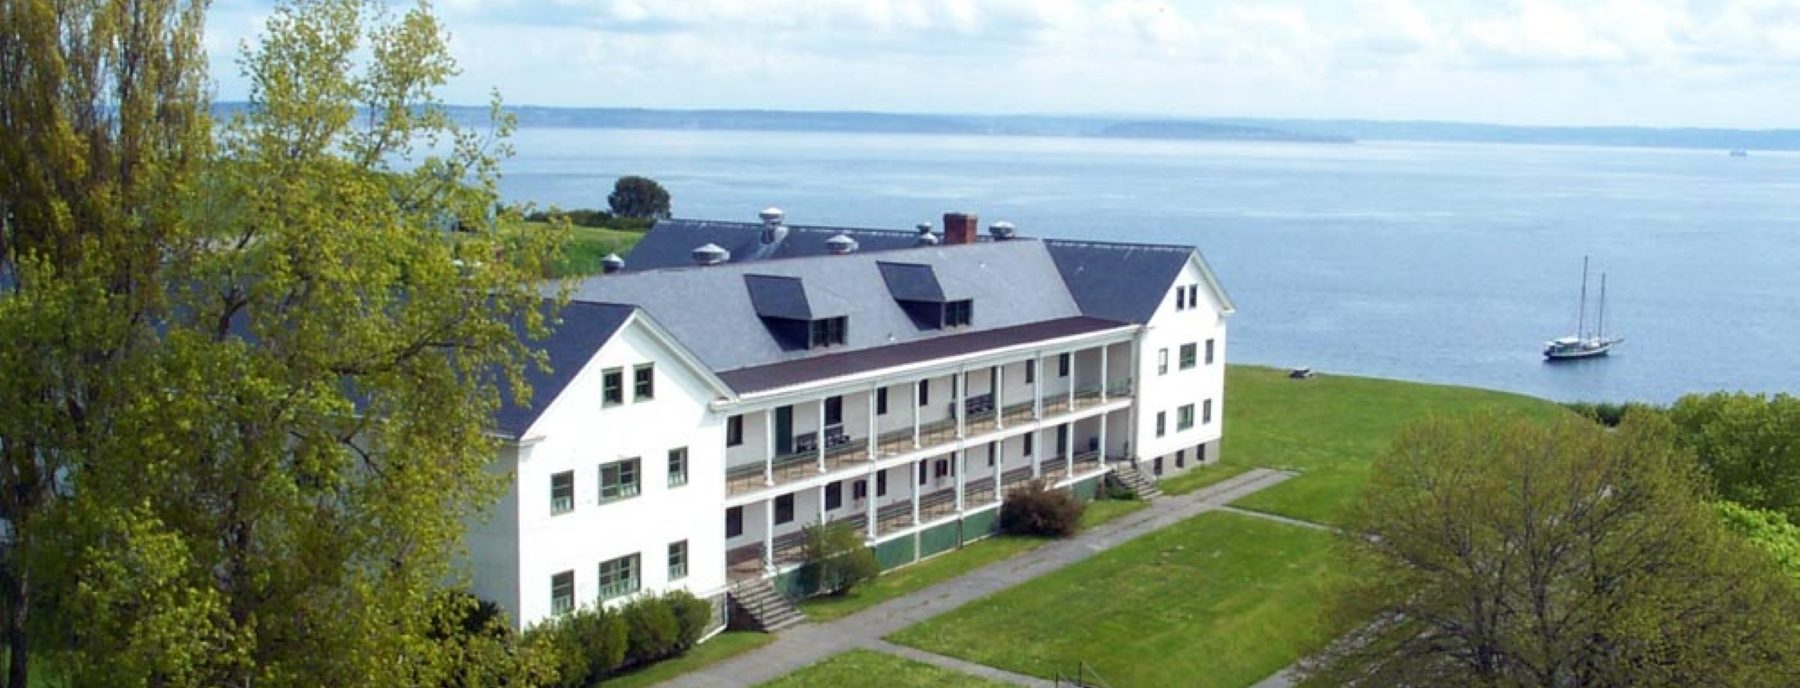 A big, white building laden with balconies overlooks a large body of water in Fort Worden, Washington. The foliage surrounding the building is green and lush, day is clear and bright. A sailboat sits just off shore.